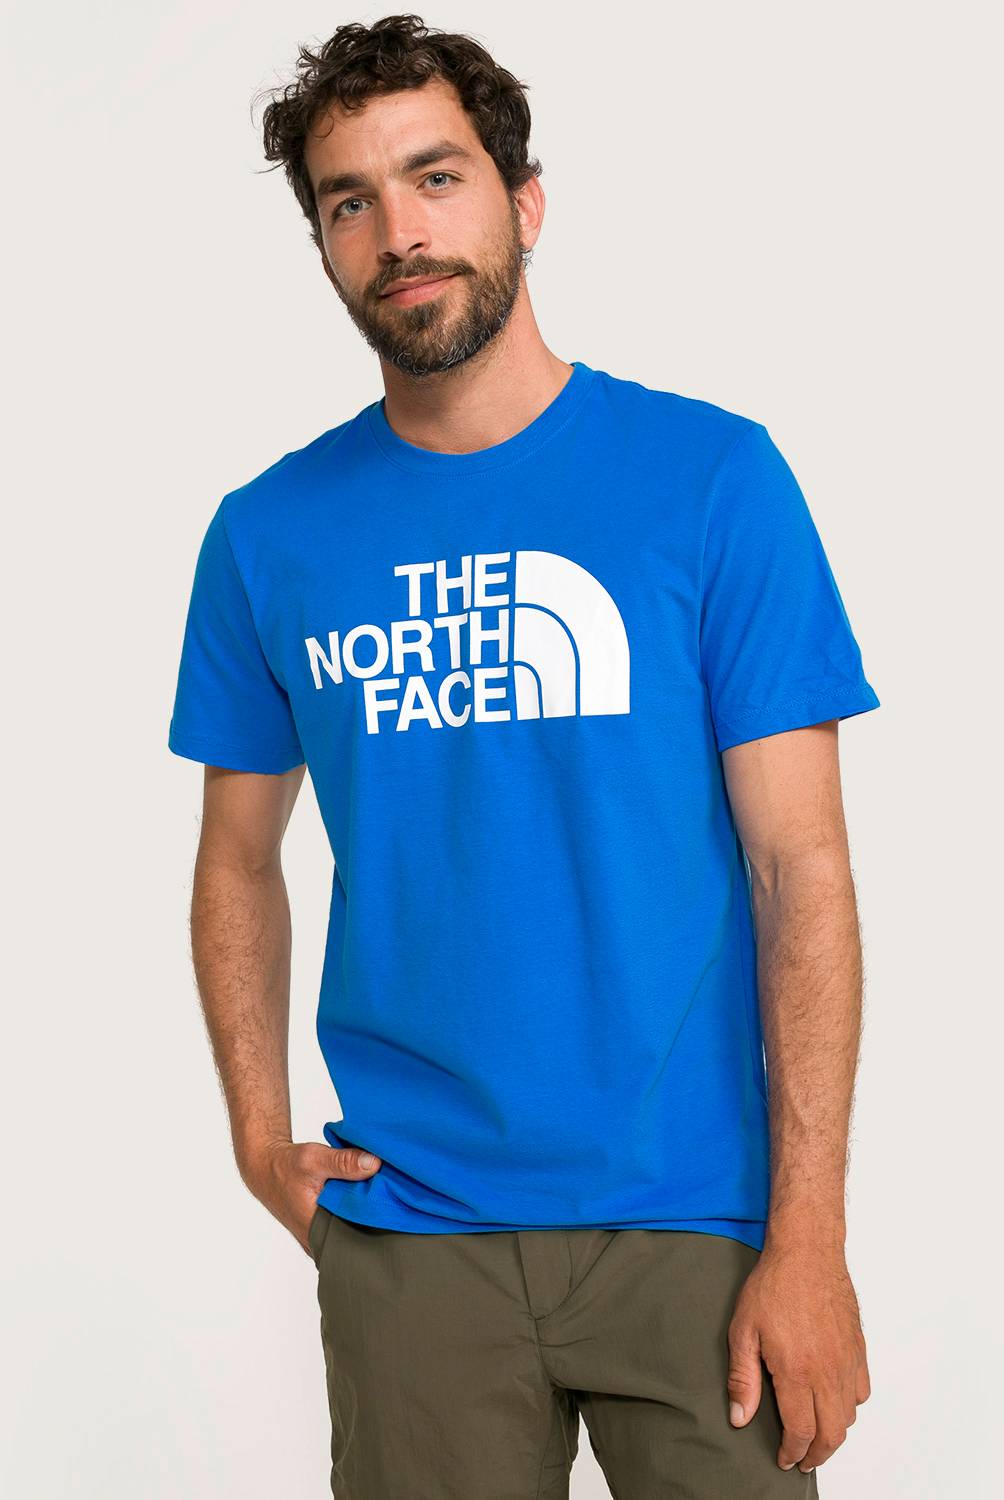 THE NORTH FACE - North Face Polera Deportiva Outdoor Hombre